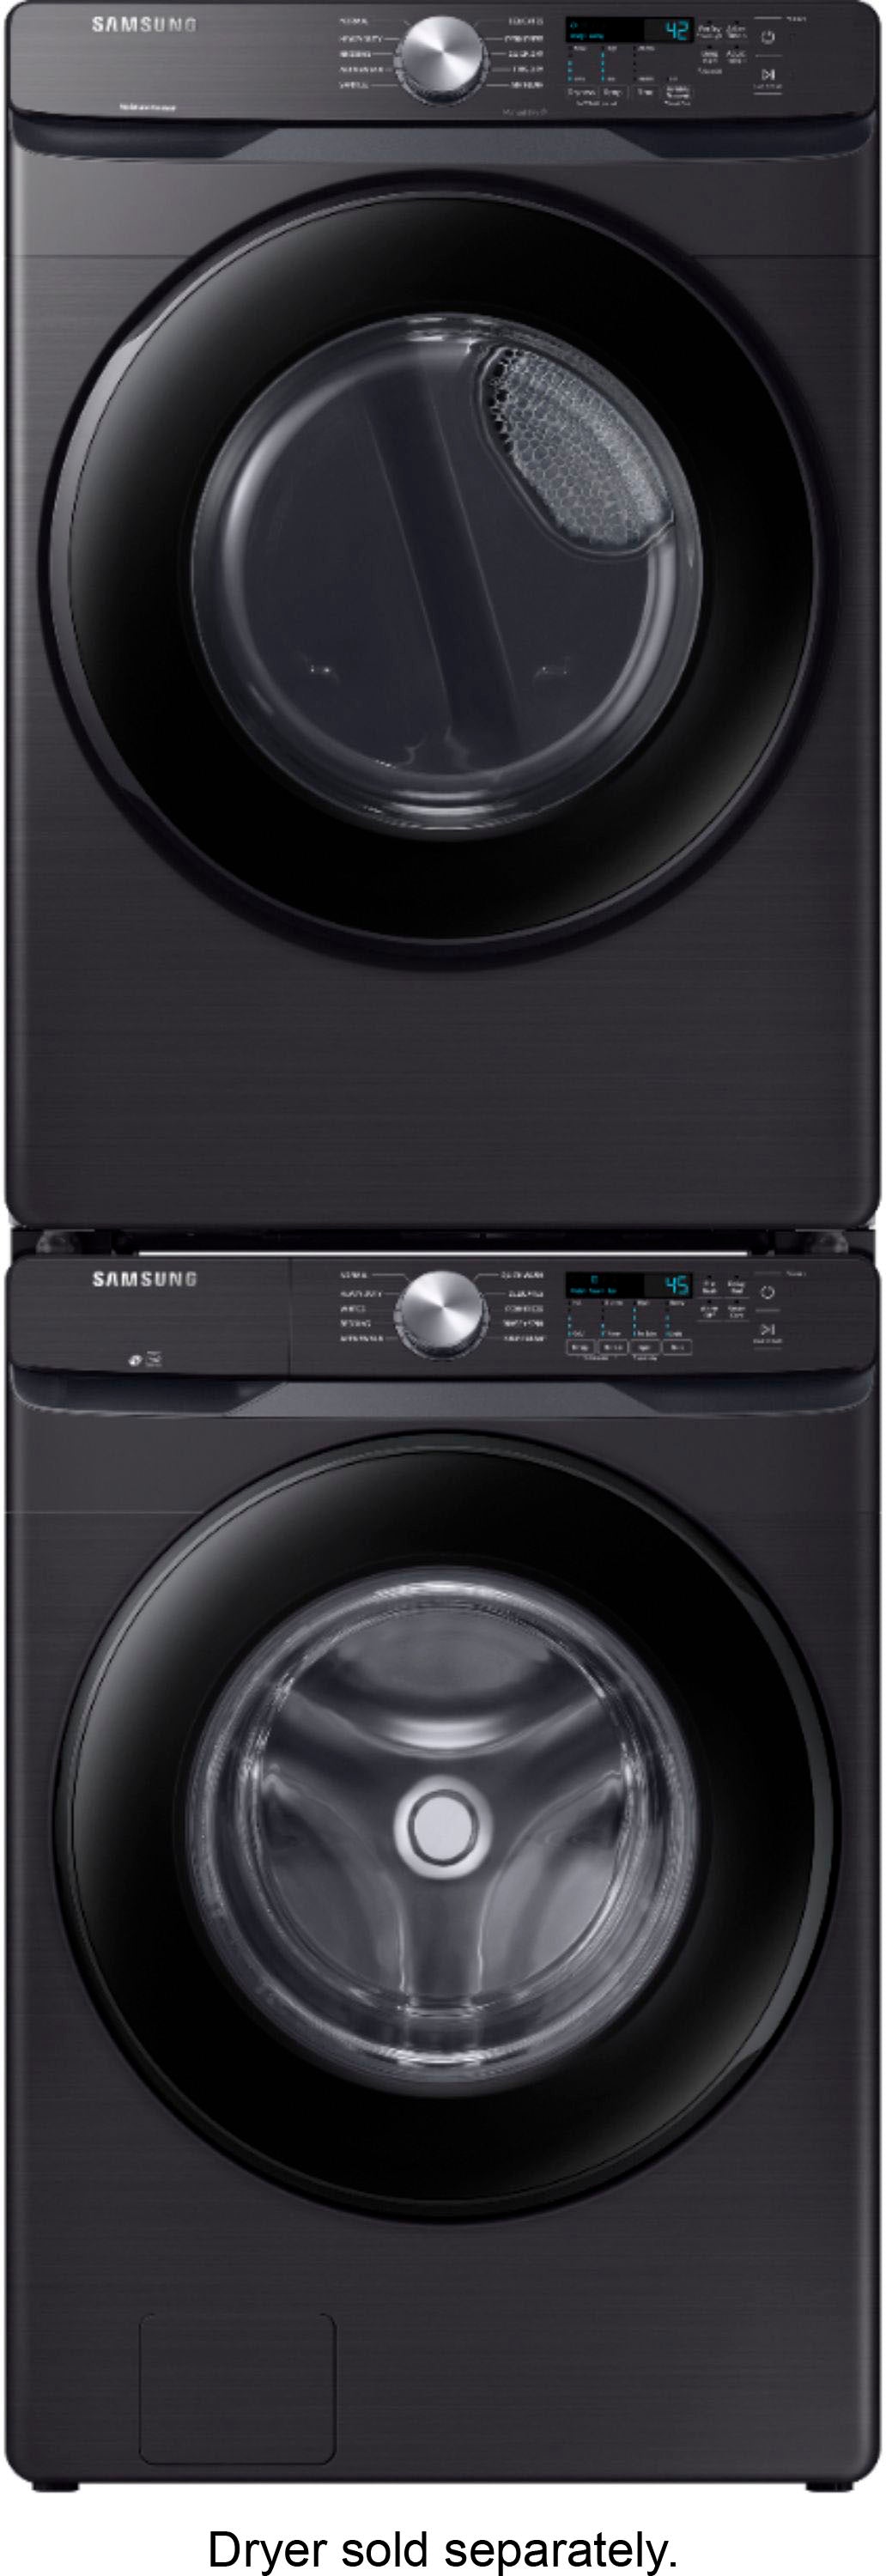 Samsung - 4.5 Cu. Ft. High Efficiency Stackable Front Load Washer with Steam and Vibration Reduction Technology+ - Black Stainless Steel_8